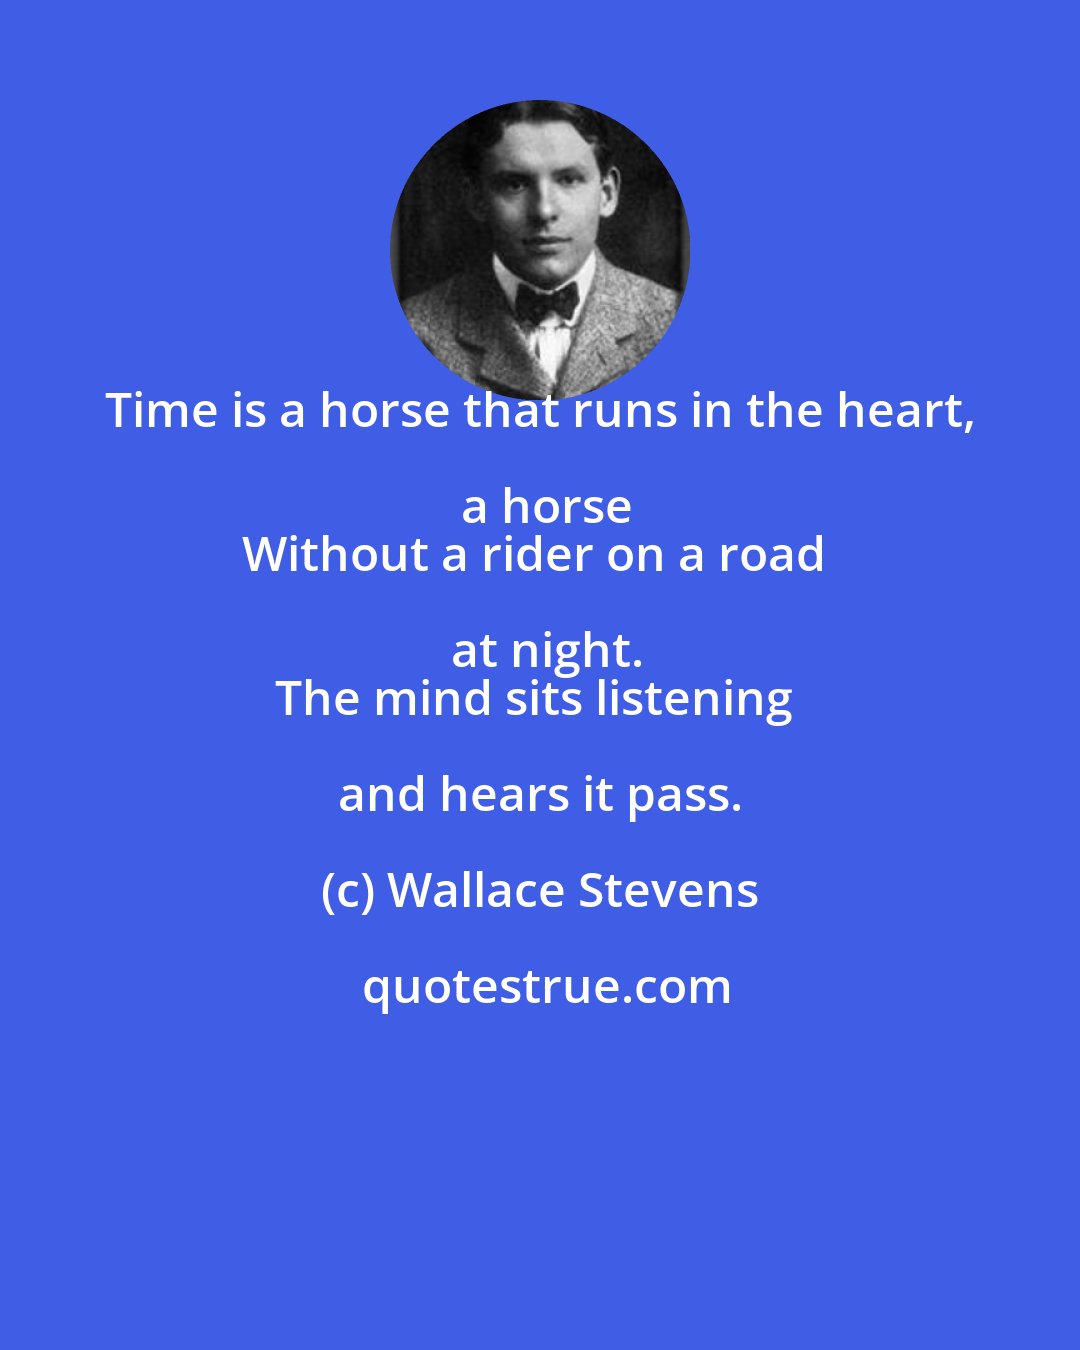 Wallace Stevens: Time is a horse that runs in the heart, a horse
Without a rider on a road at night.
The mind sits listening and hears it pass.